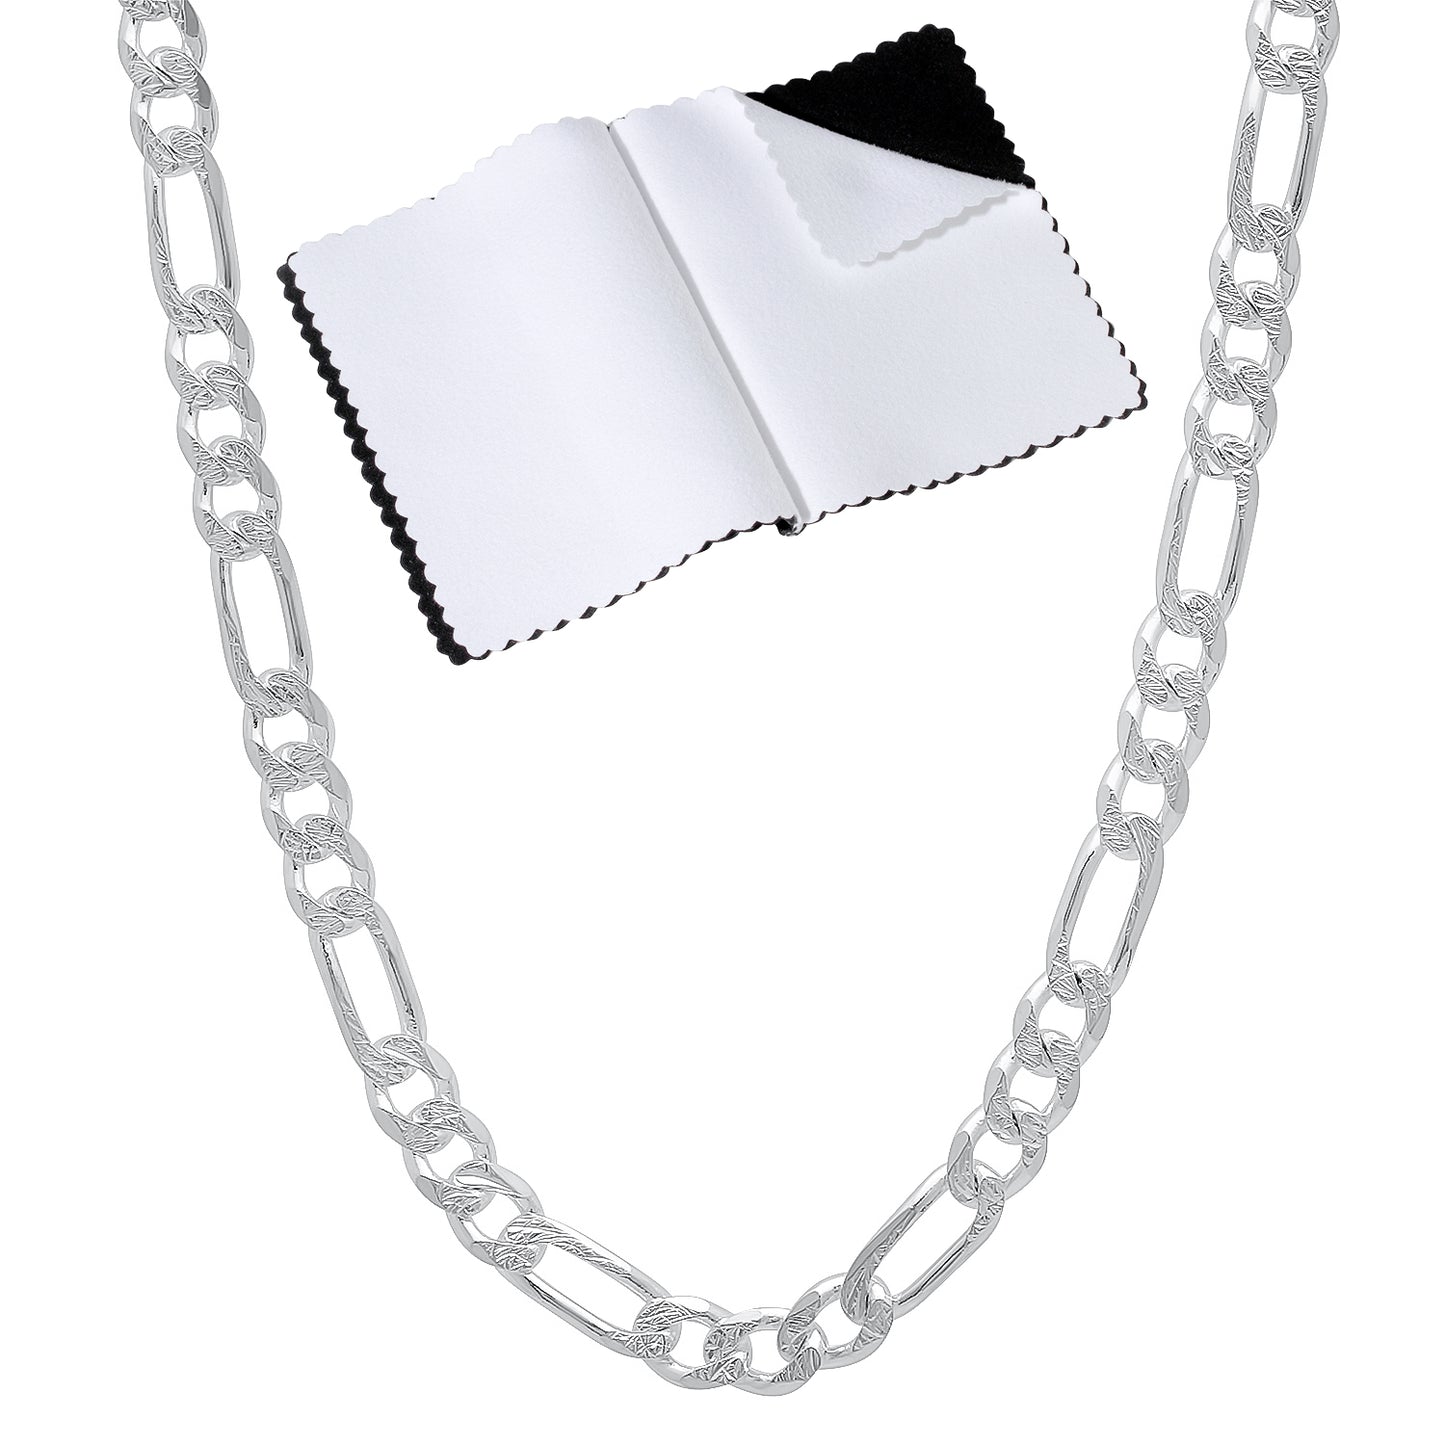 4.7mm .925 Sterling Silver Diamond-Cut Flat Figaro Chain Necklace + Gift Box (SKU: SYC123-BX)